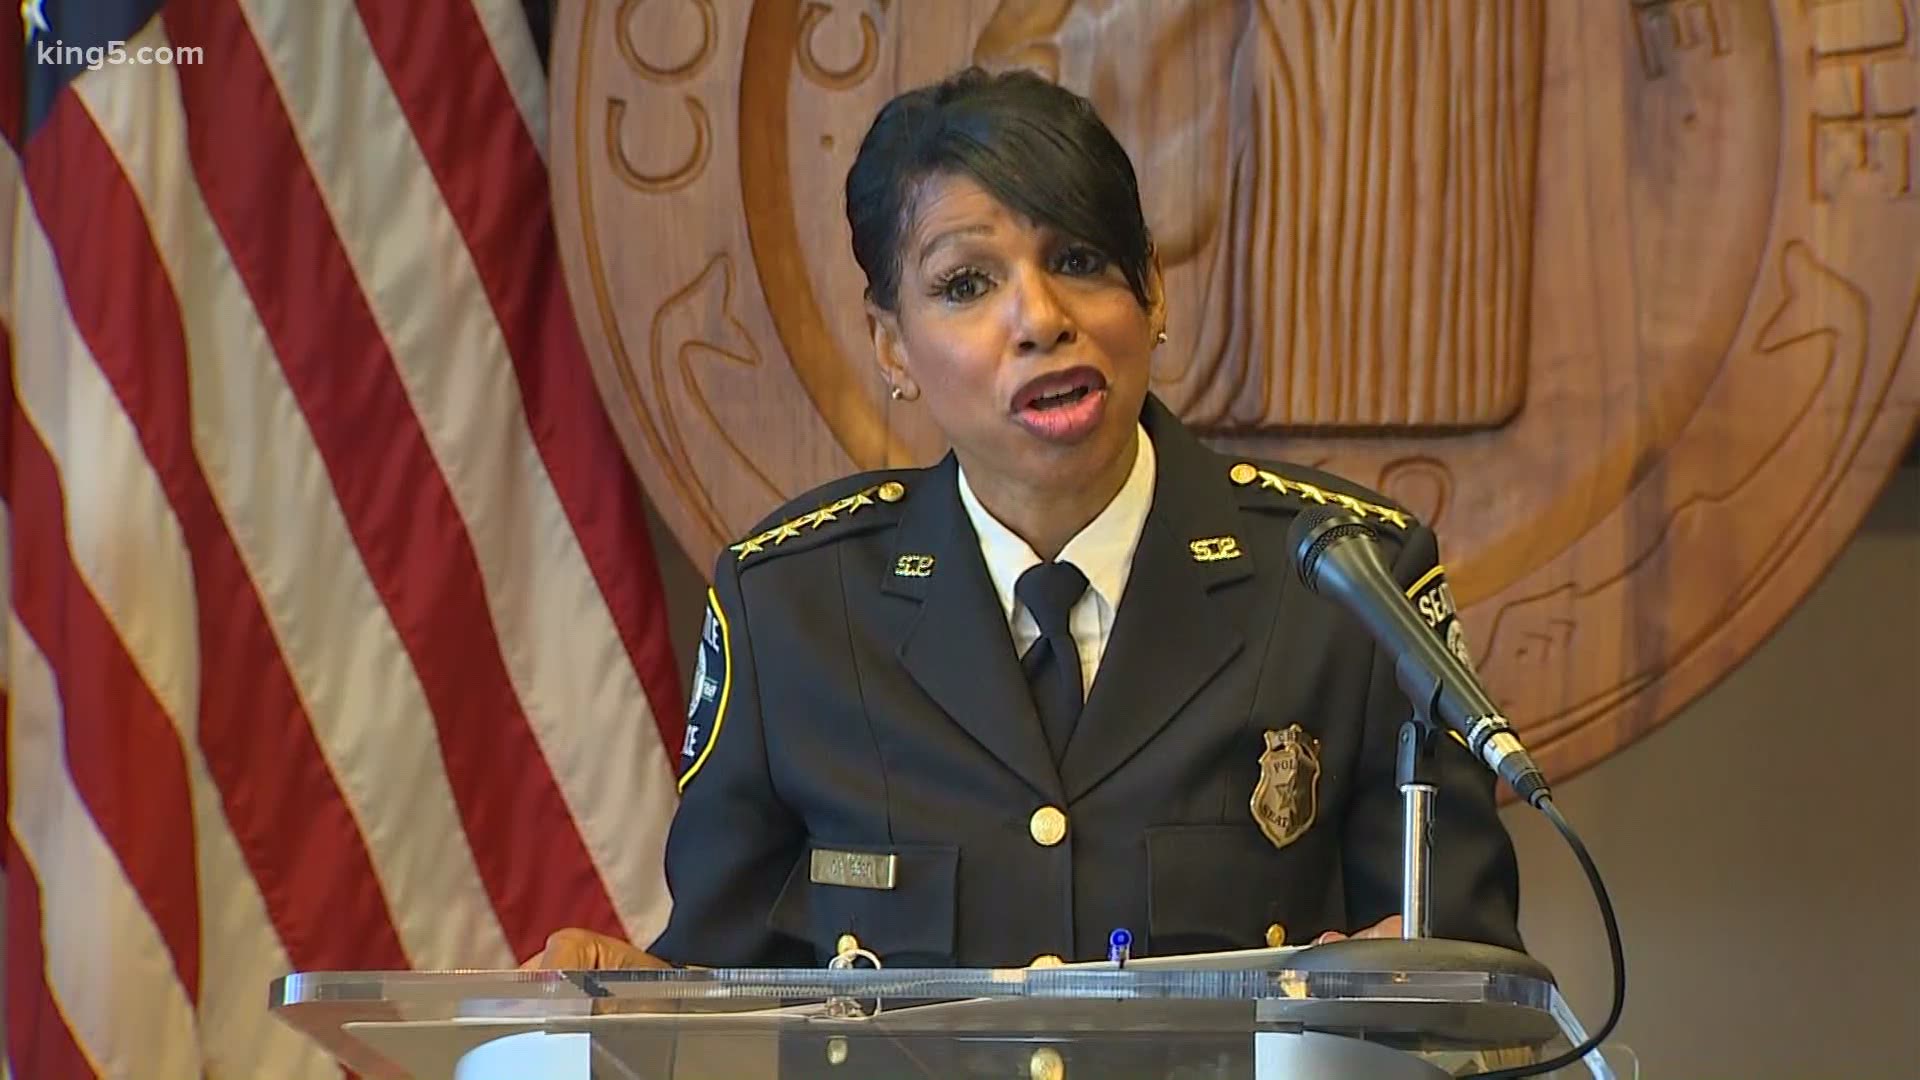 President Trump said during a national press conference Tuesday that it was a shame Seattle Police Chief Carmen Best was leaving.